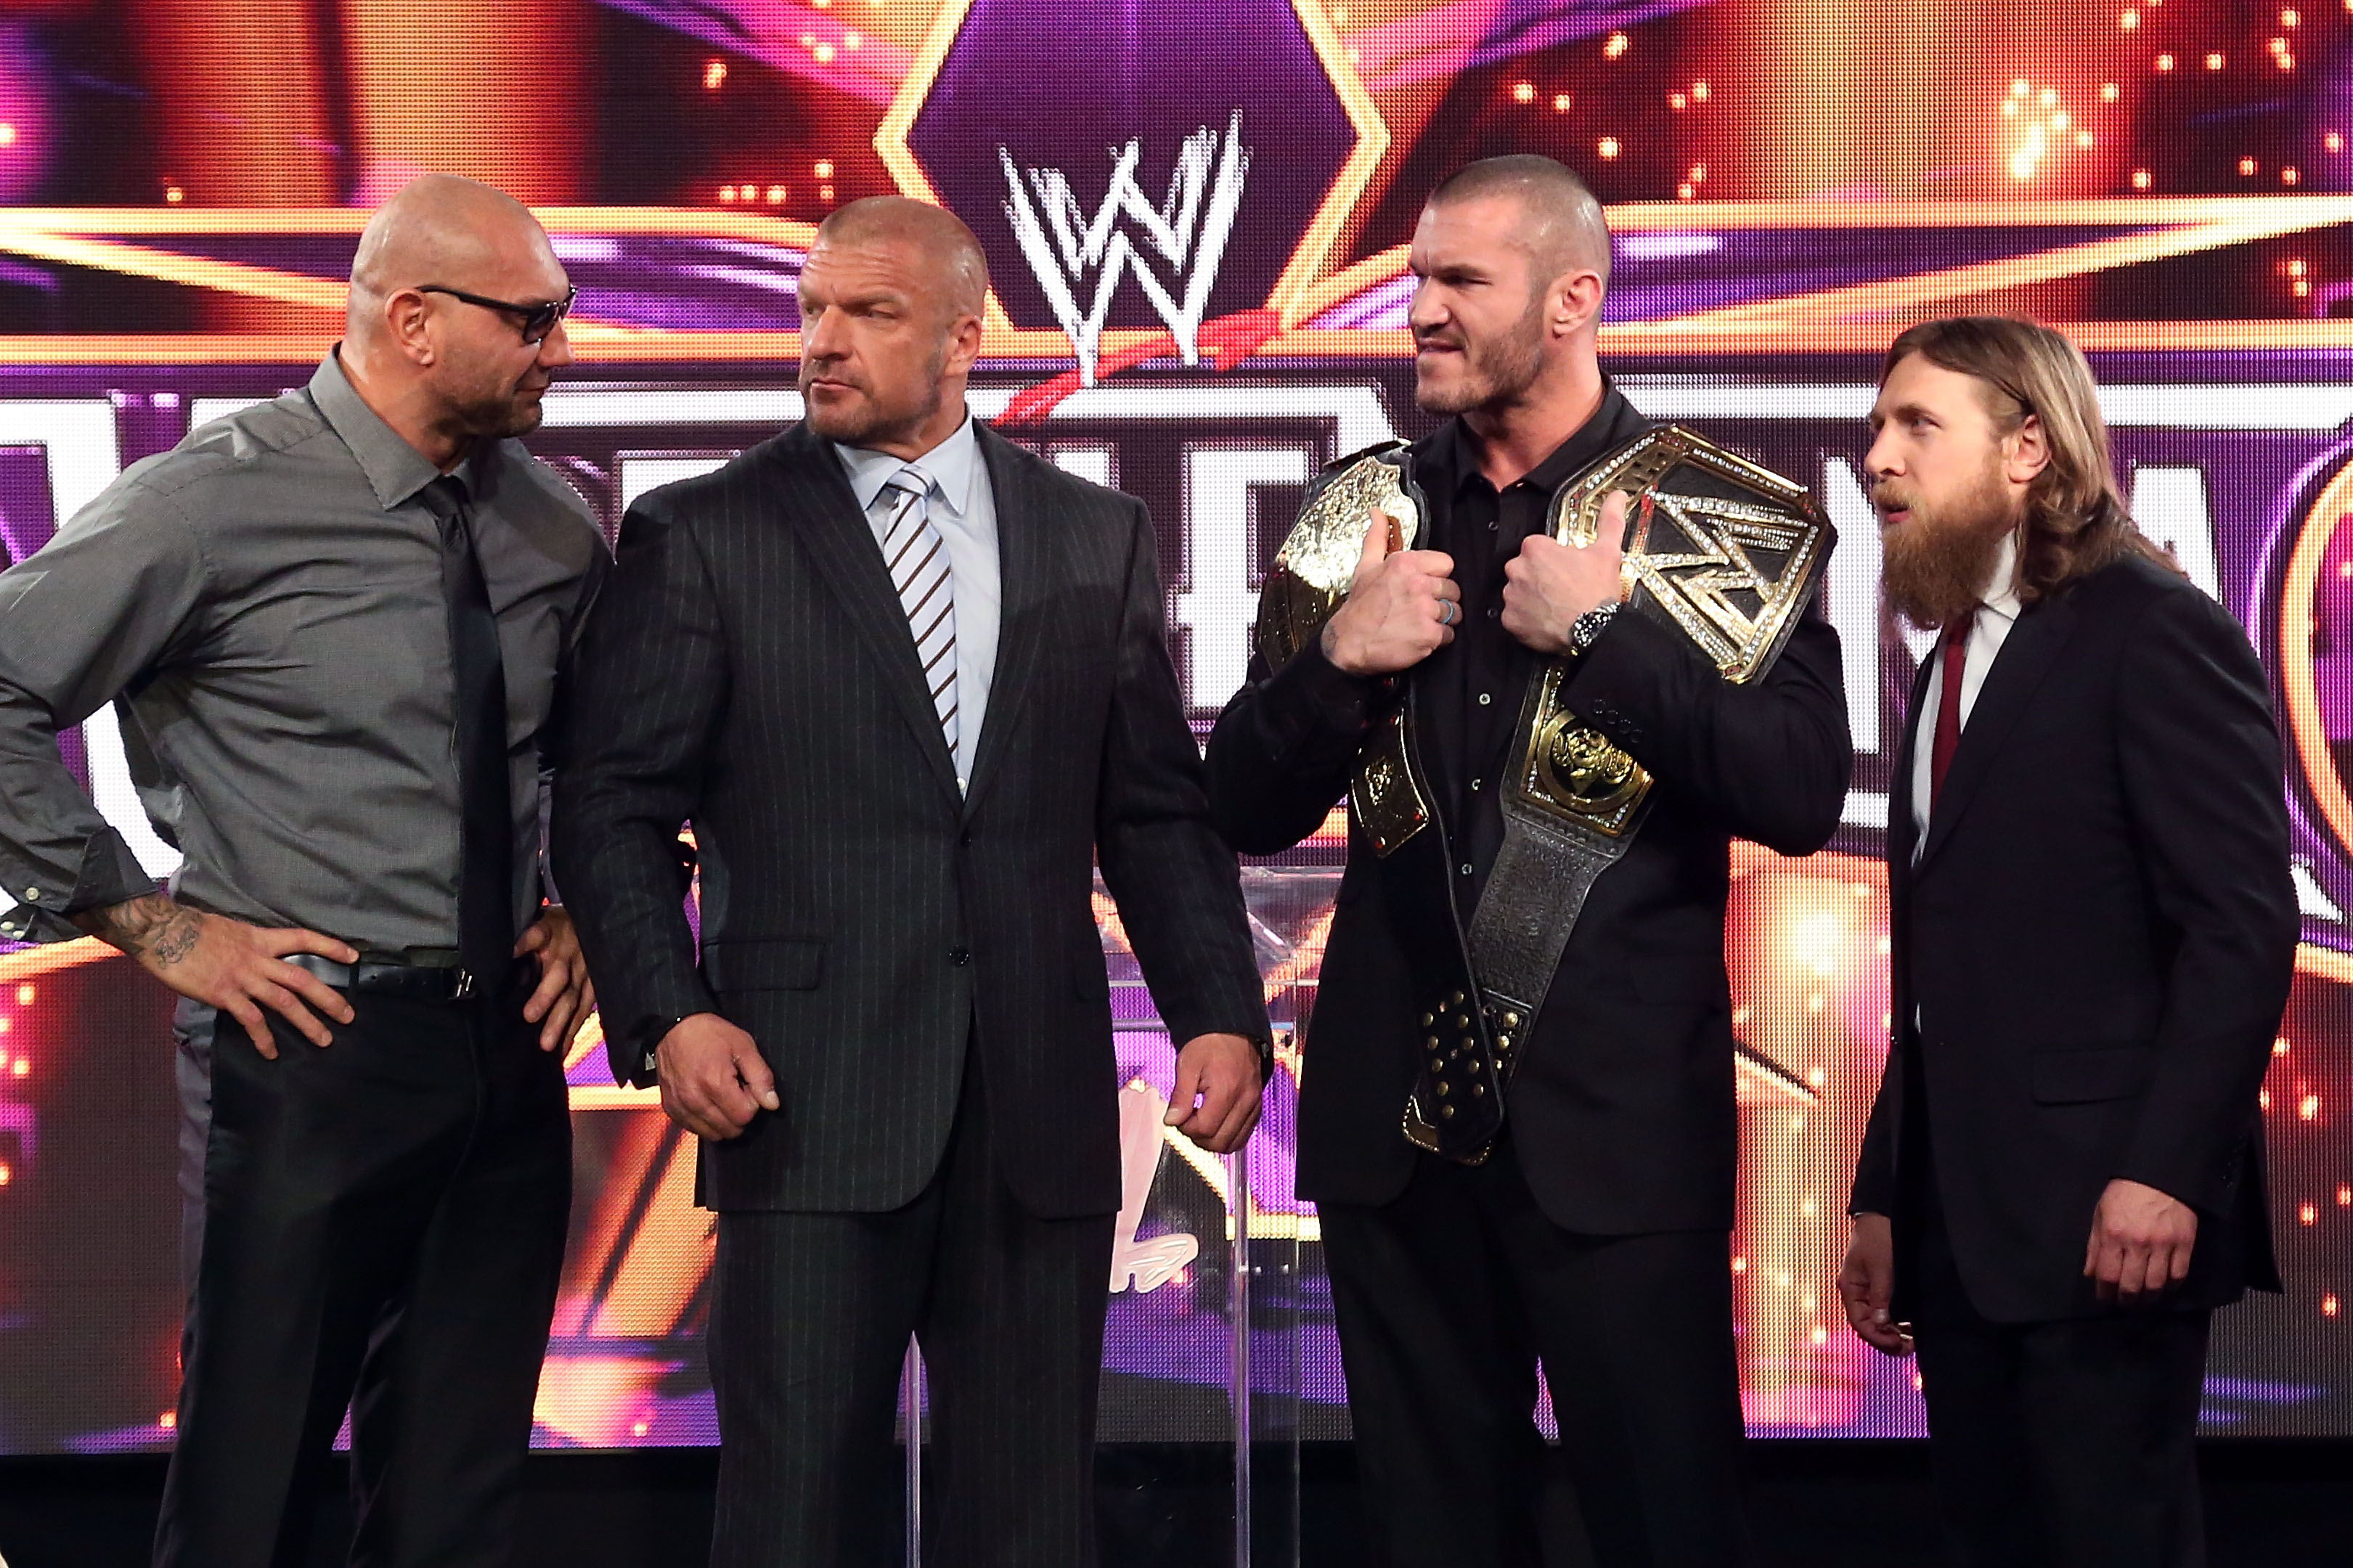 NEW YORK, NY - APRIL 01: Dave Batista, Triple H, Randy Orton, and Daniel Bryan attend the WrestleMania 30 press conference at the Hard Rock Cafe New York on April 1, 2014 in New York City. (Photo by Taylor Hill/WireImage)